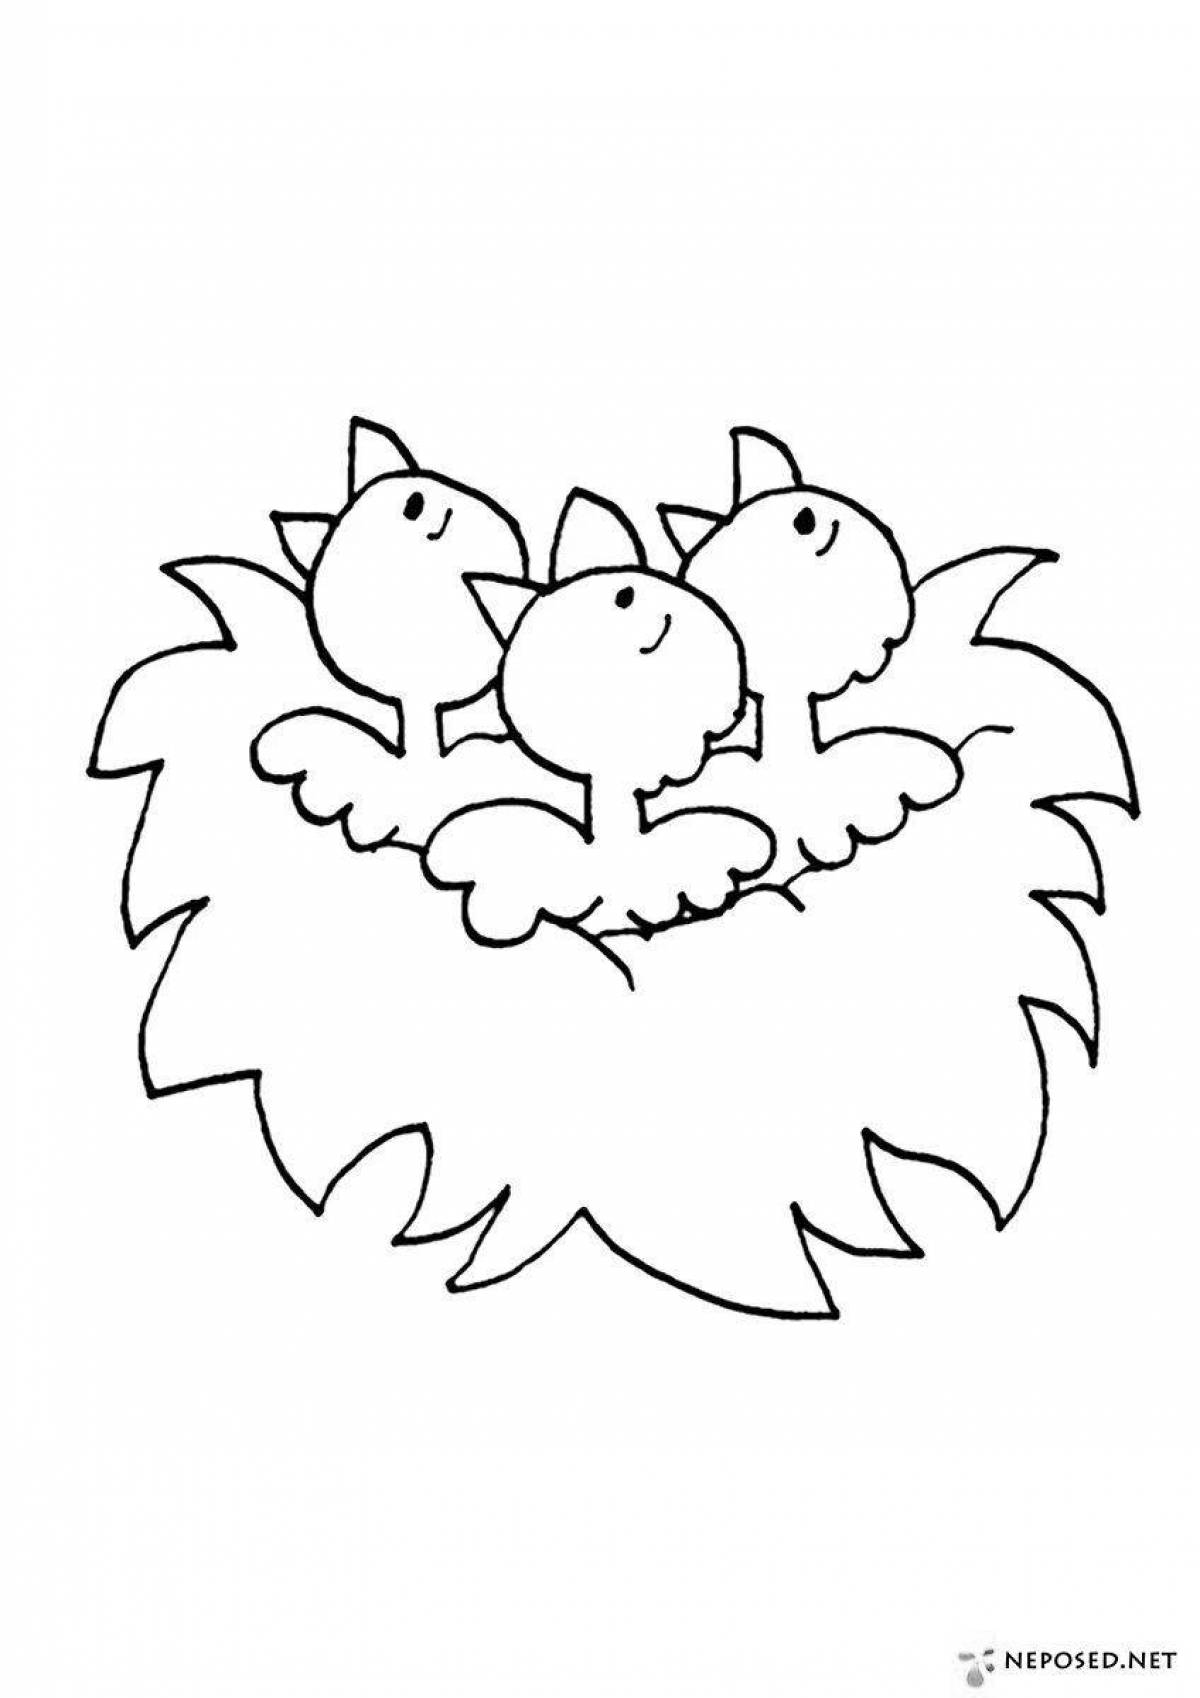 Color-crazy nest coloring page for kids